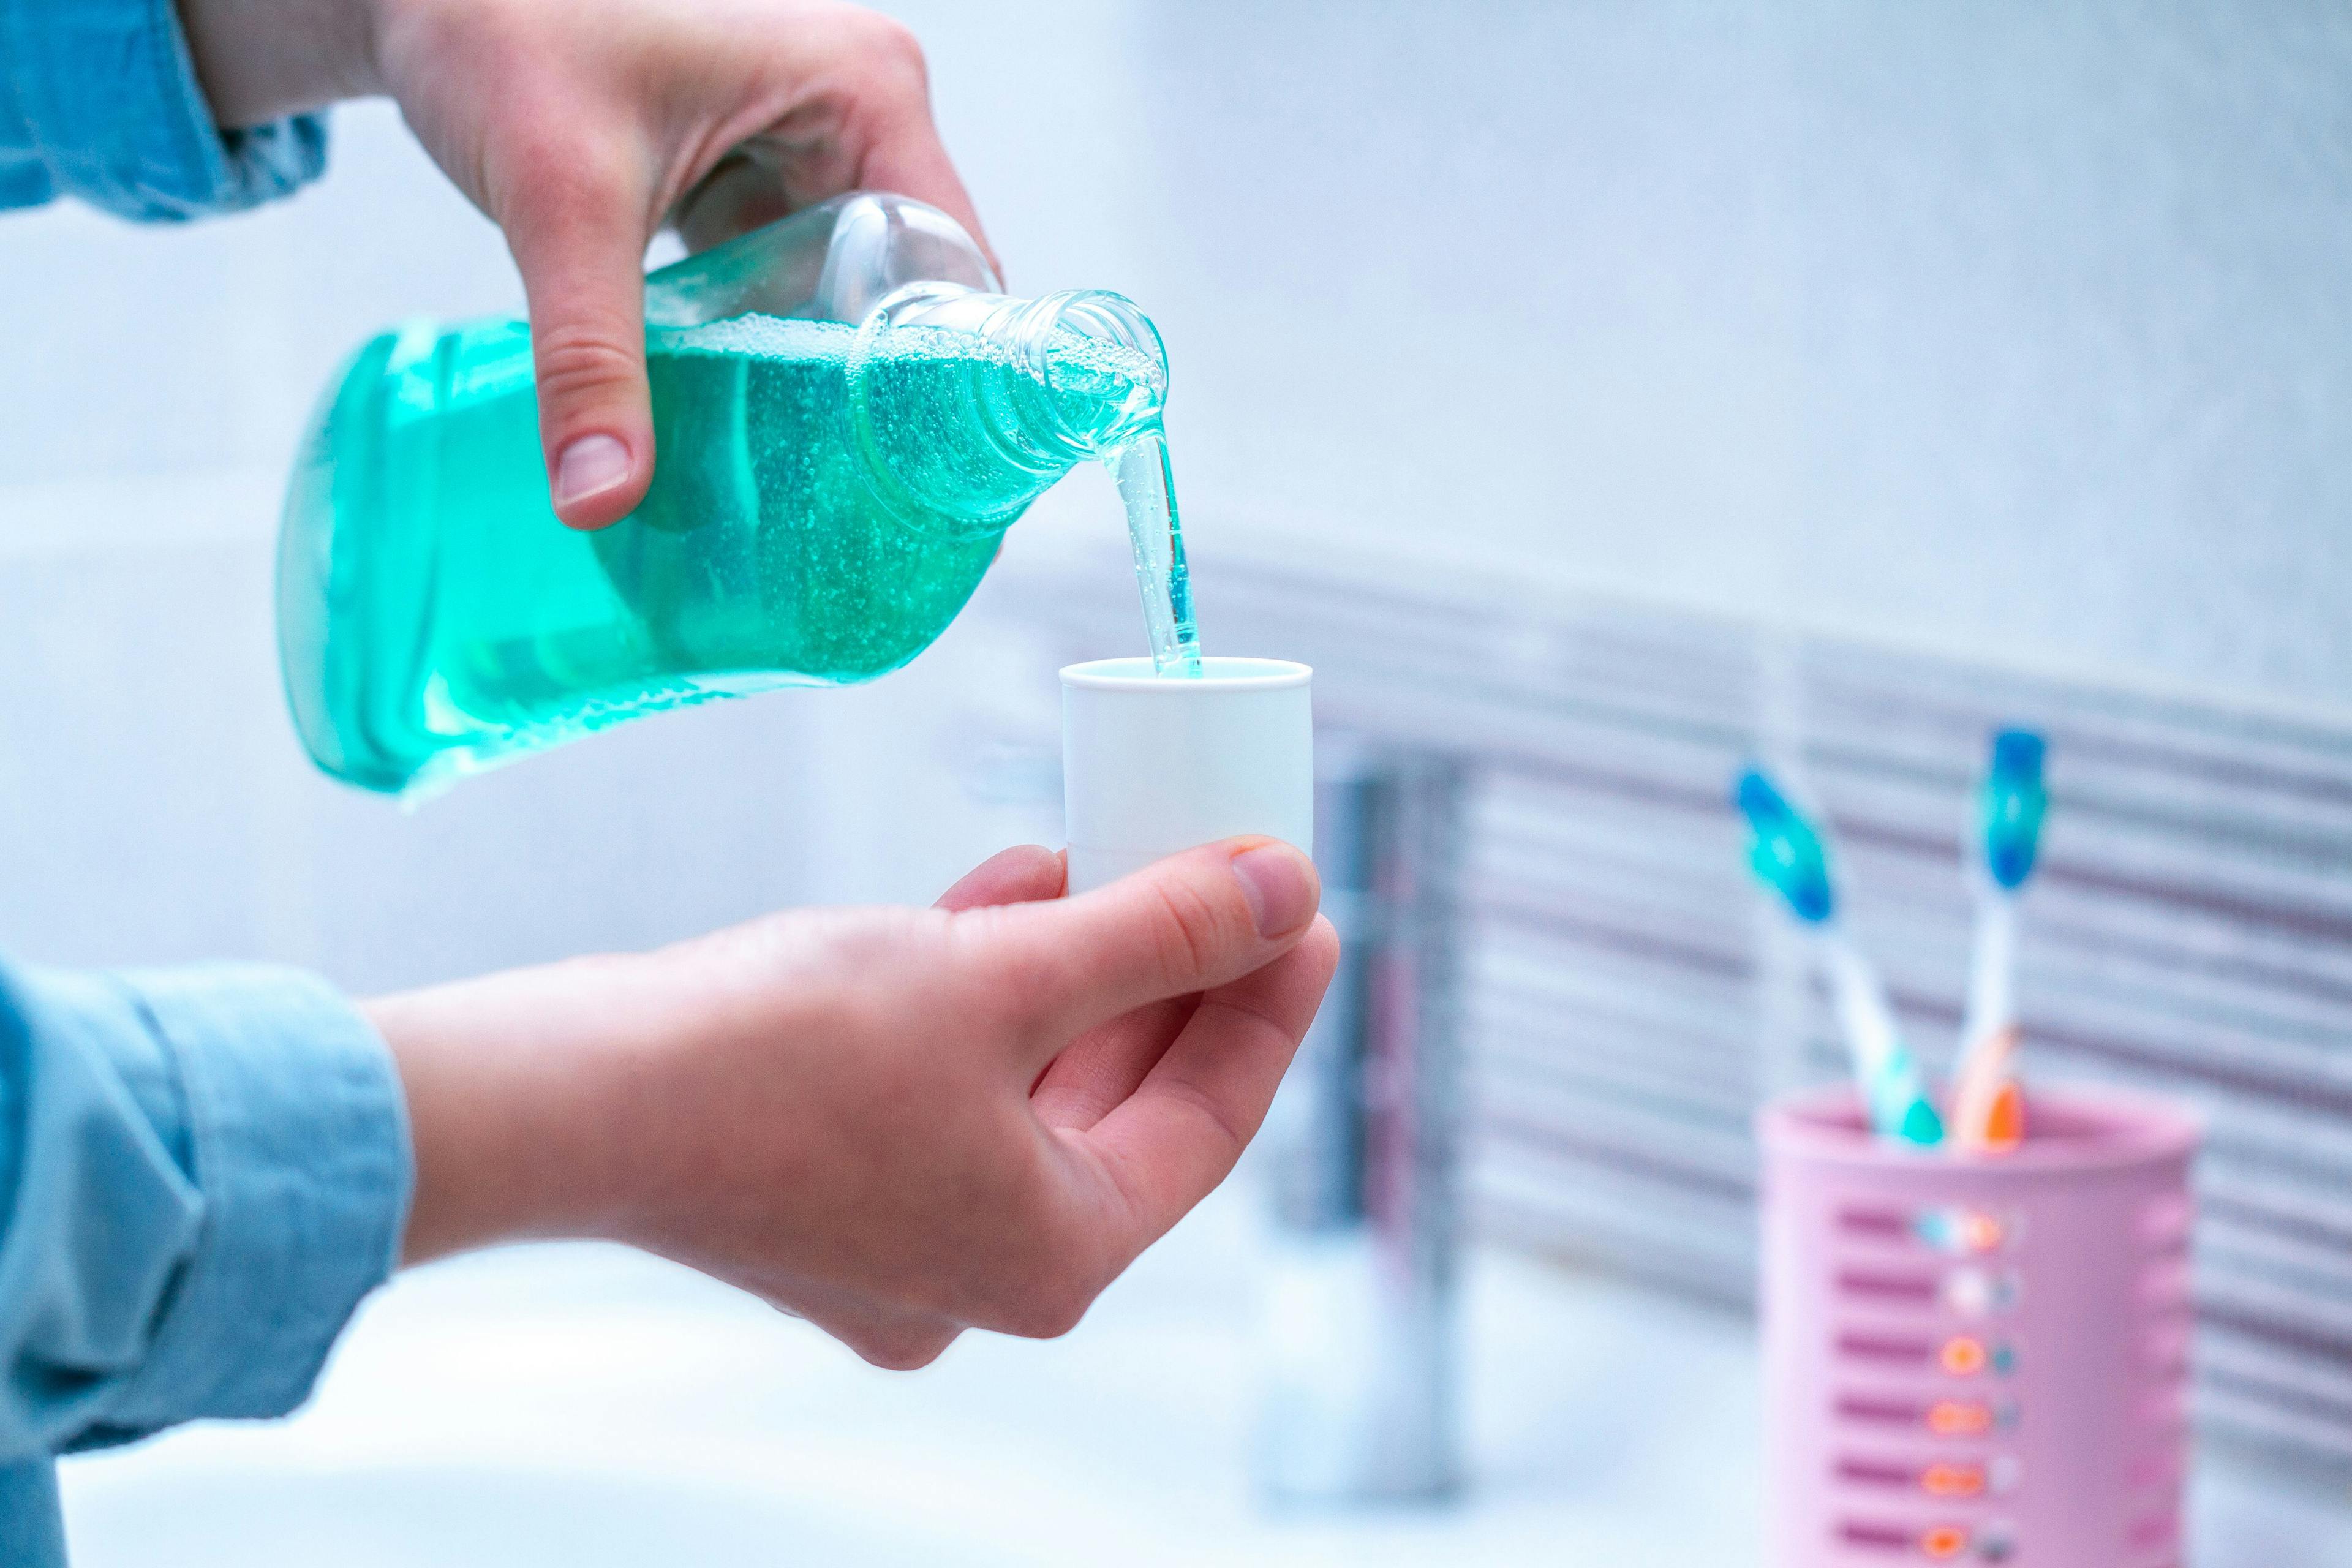 Certain Types of Mouthwashes Shown to Stop COVID-19 Transmission